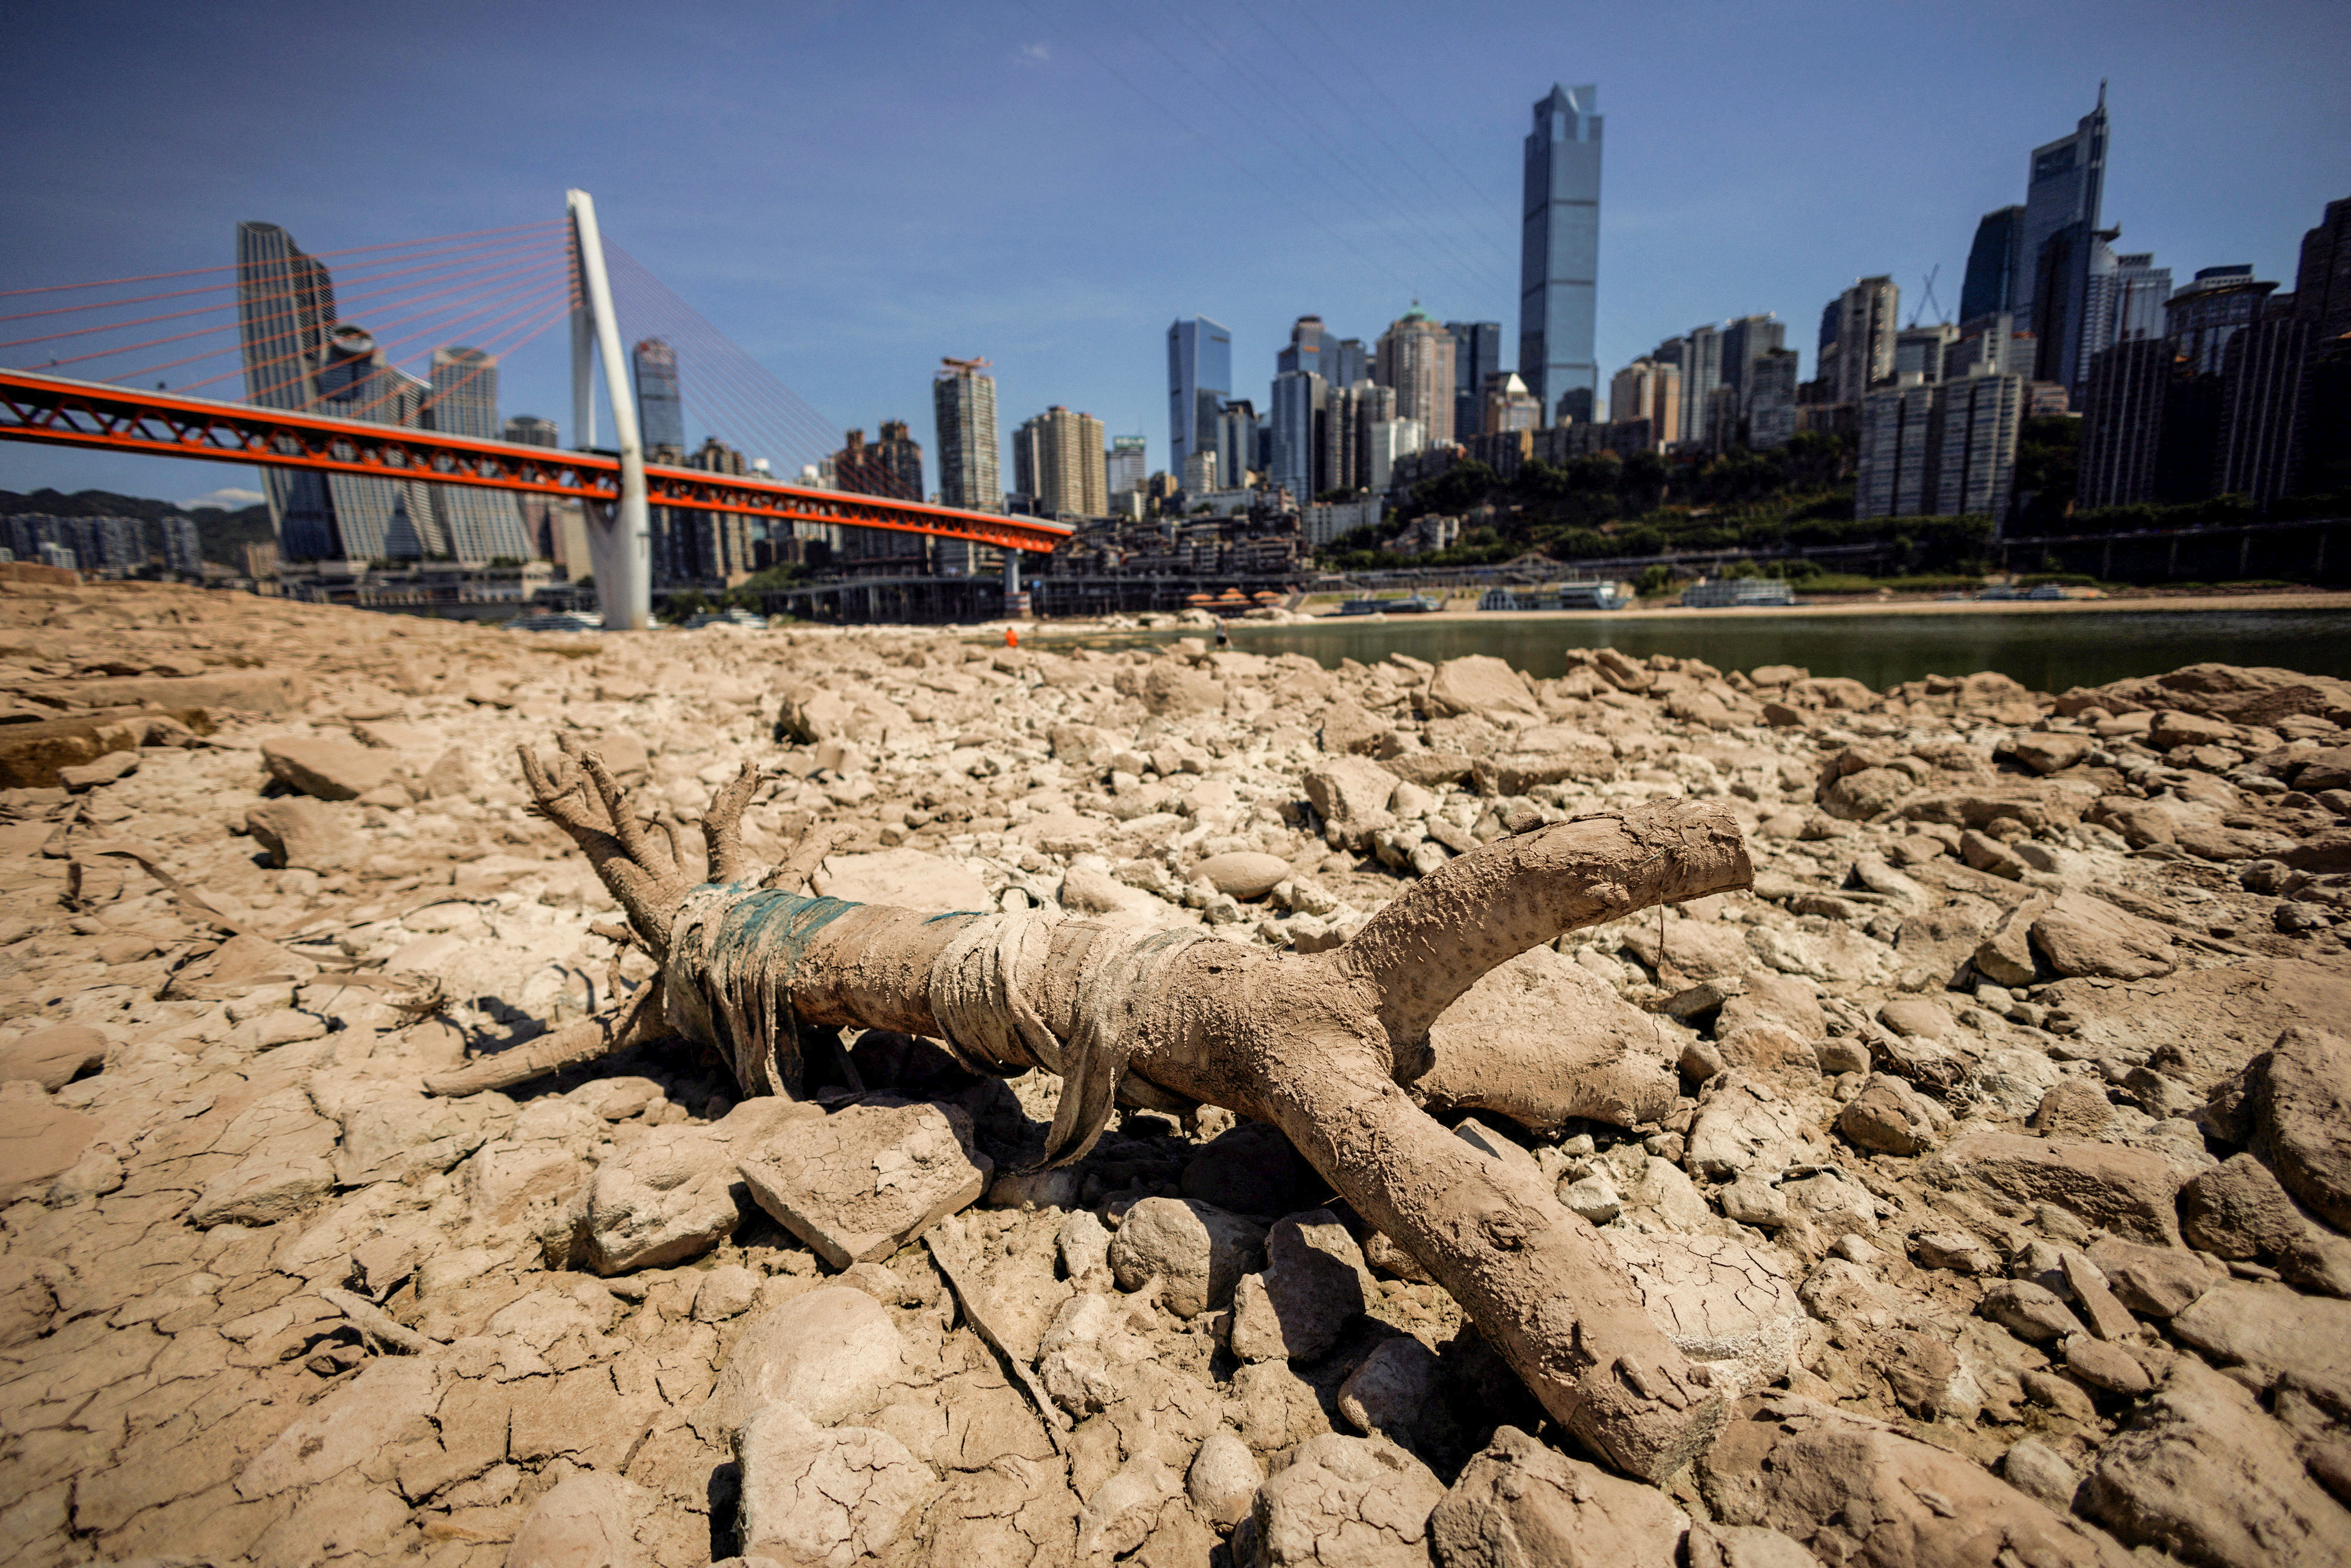 Parts of southern China have been gripped by record temperatures and drought in recent months. Photo: Reuters